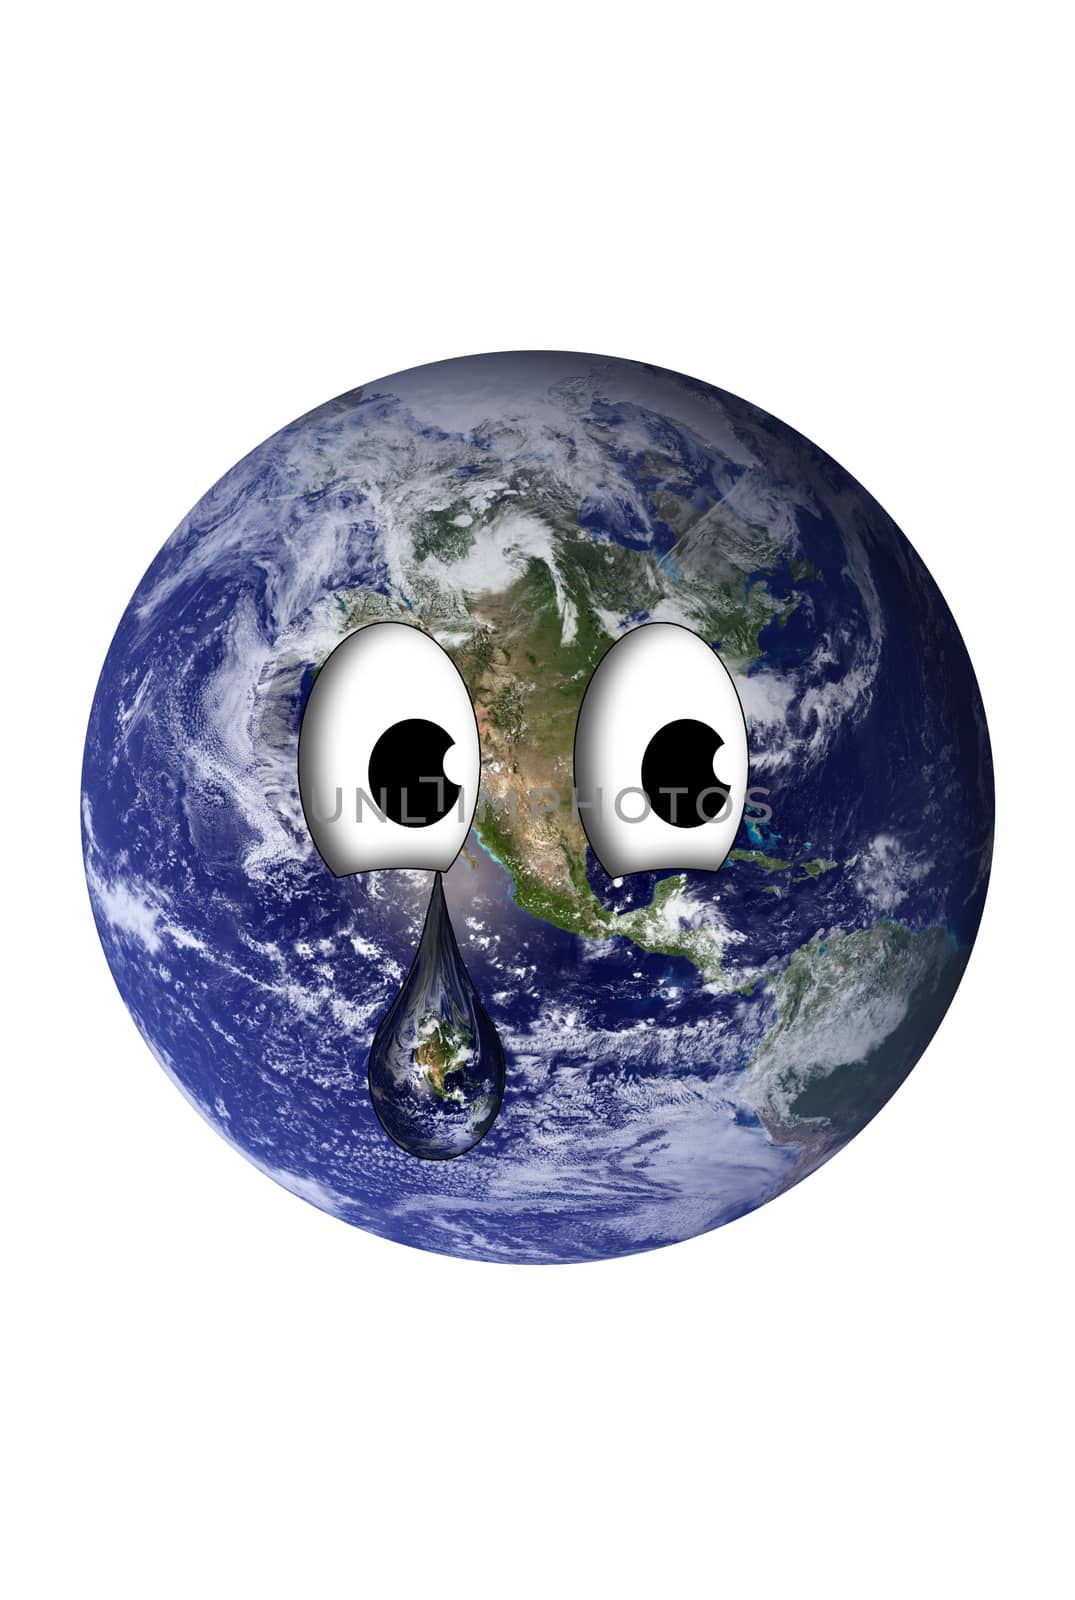 Earth With A Teardrop by rcarner